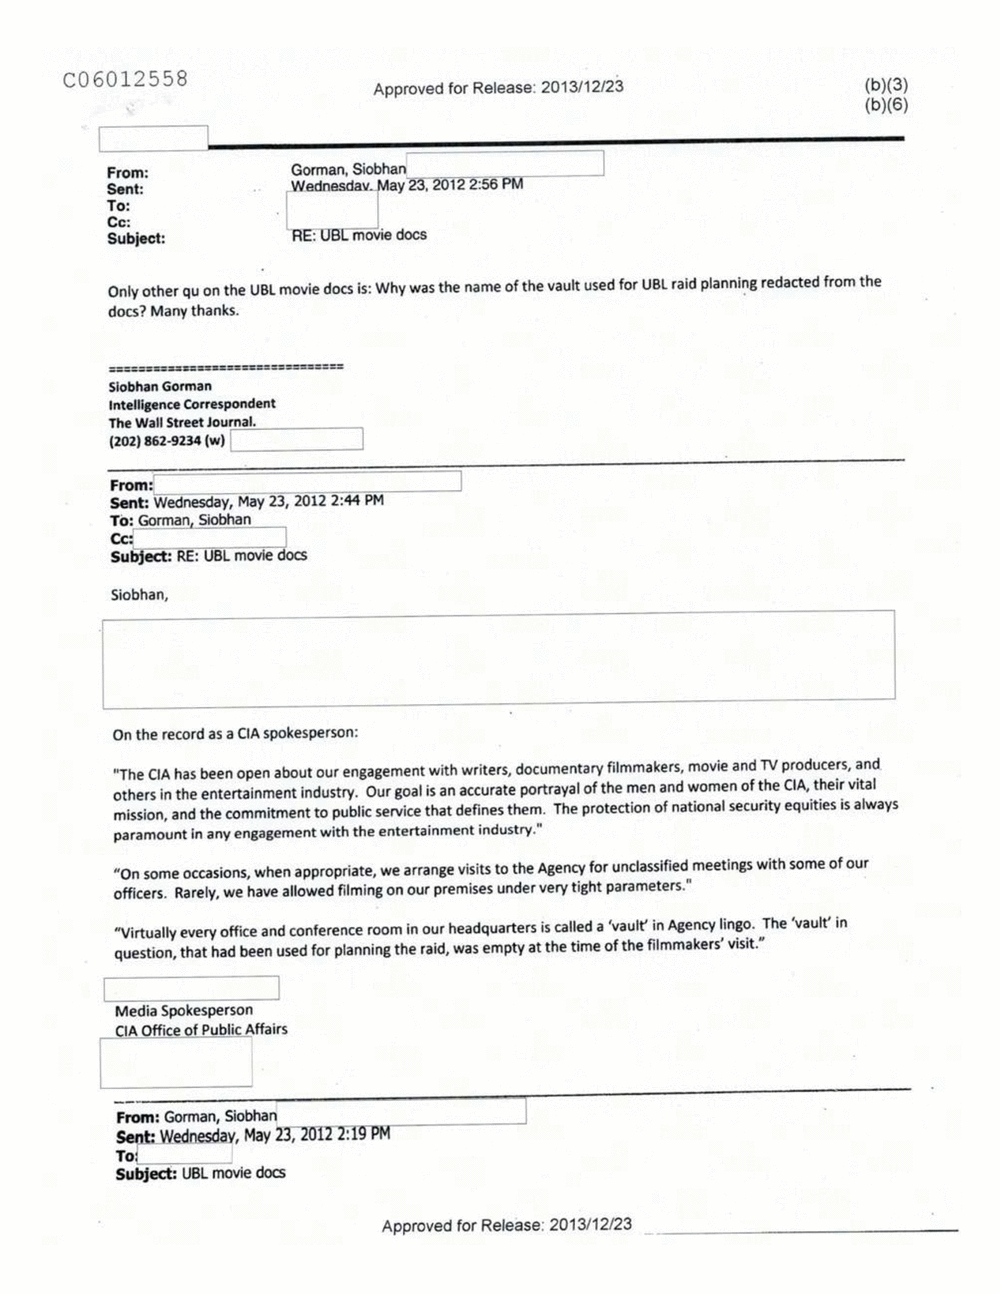 Page 160 from Email Correspondence Between Reporters and CIA Flacks